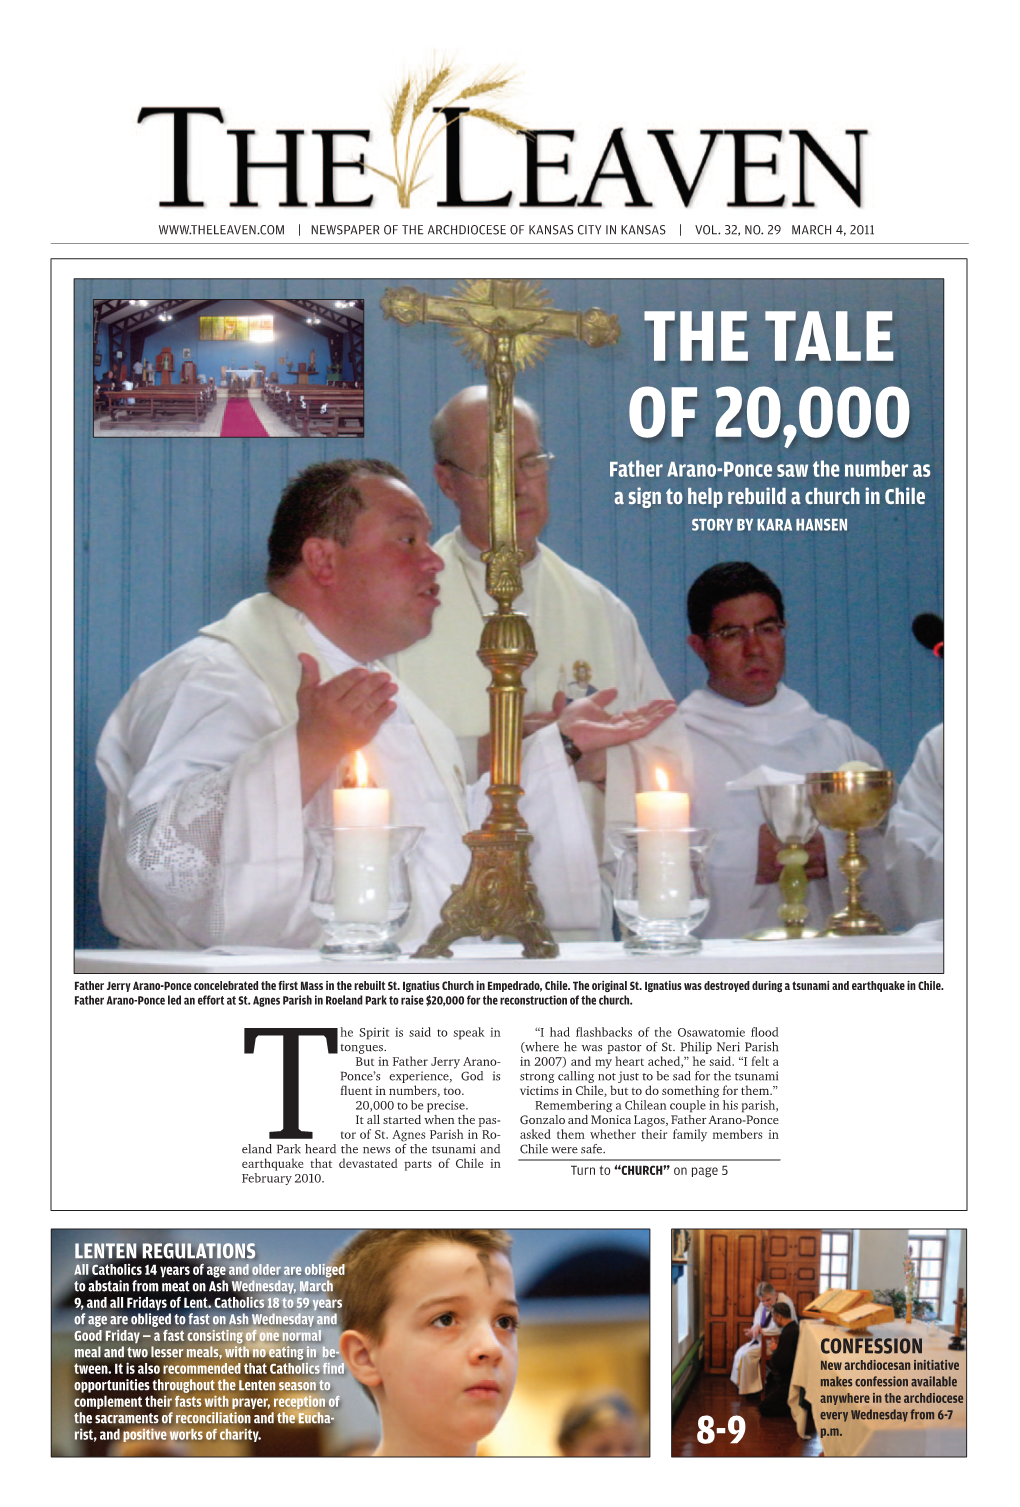 The Tale of 20,000 Father Arano-Ponce Saw the Number As a Sign to Help Rebuild a Church in Chile Story by Kara Hansen